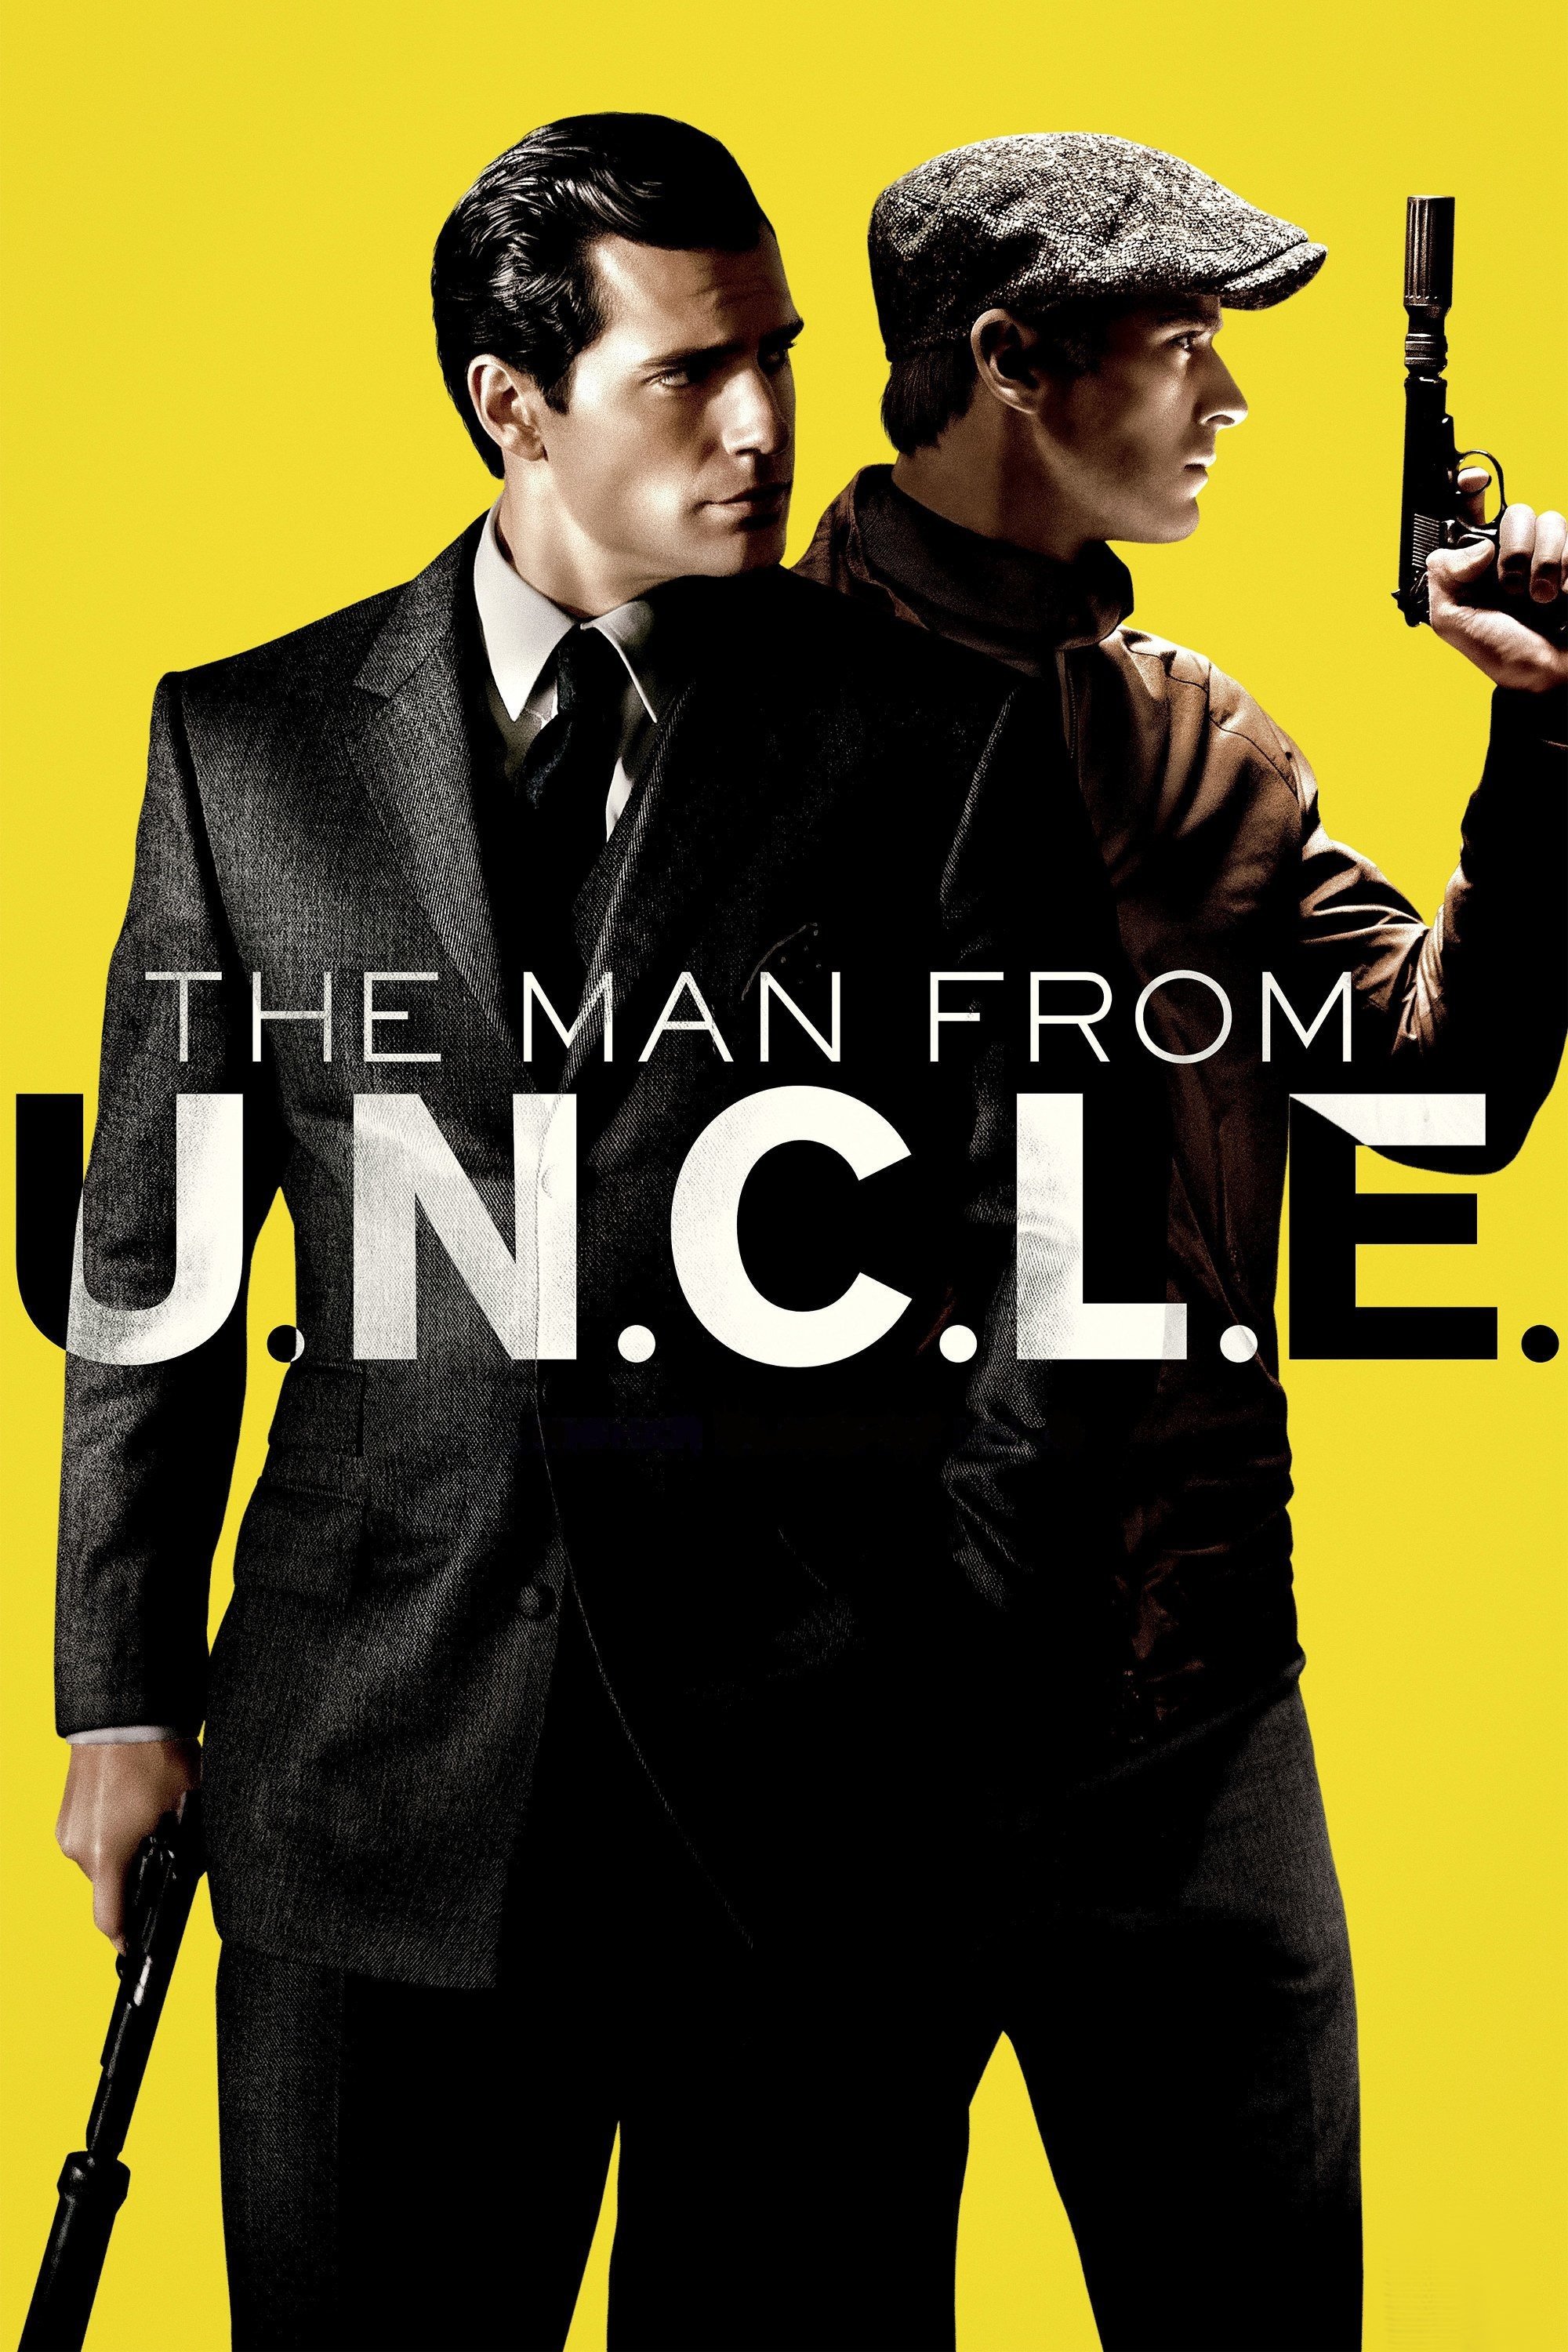 Poster for the movie "The Man from U.N.C.L.E."